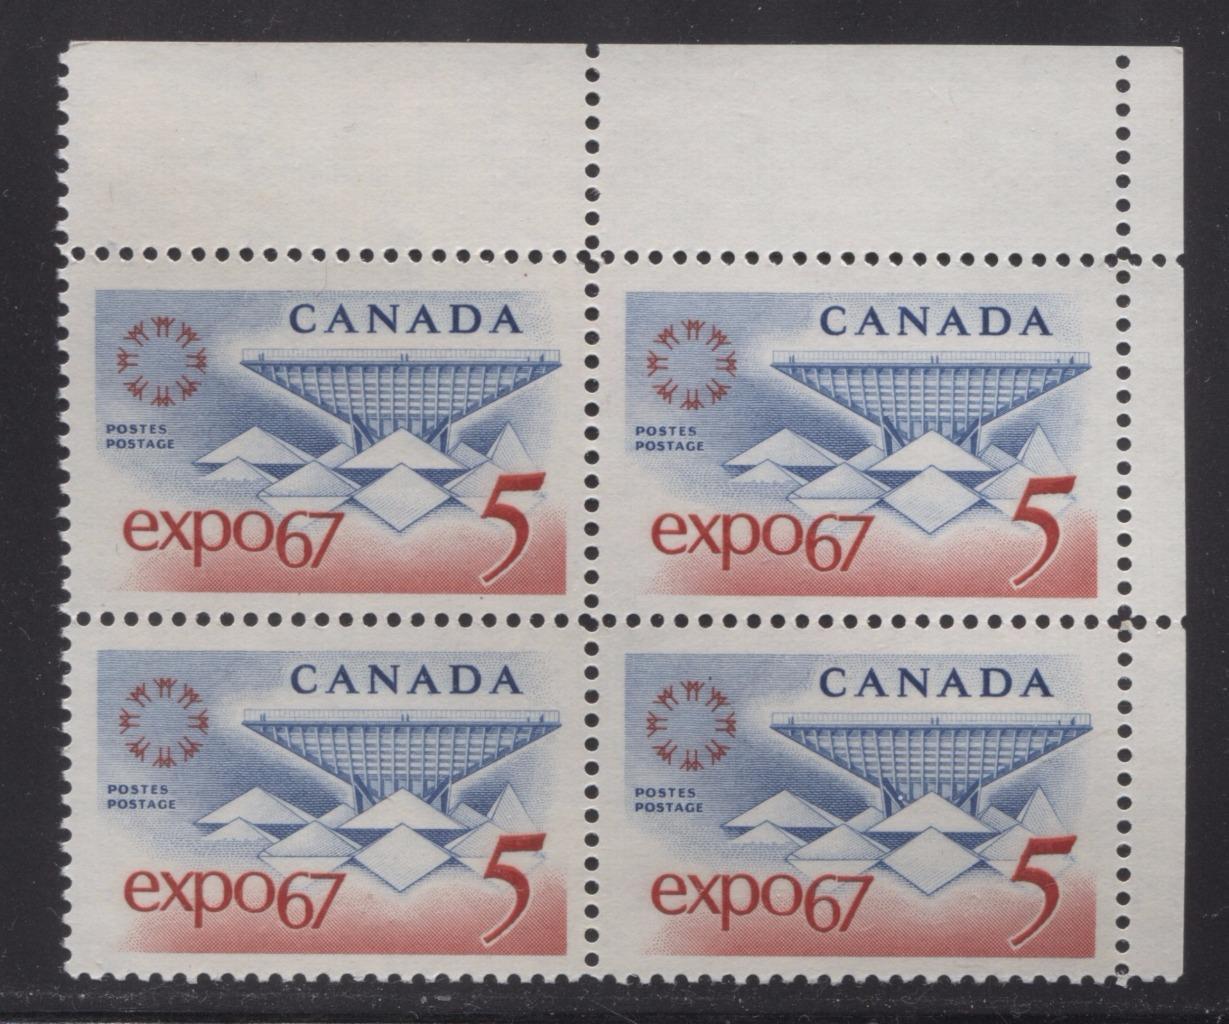 Canada #469 (SG#611) 5c Blue and Red Expo 67 LF-fl IV, LF, 1-2 Fibres Paper, Streaky Gum UR Block VF-80 NH Brixton Chrome 